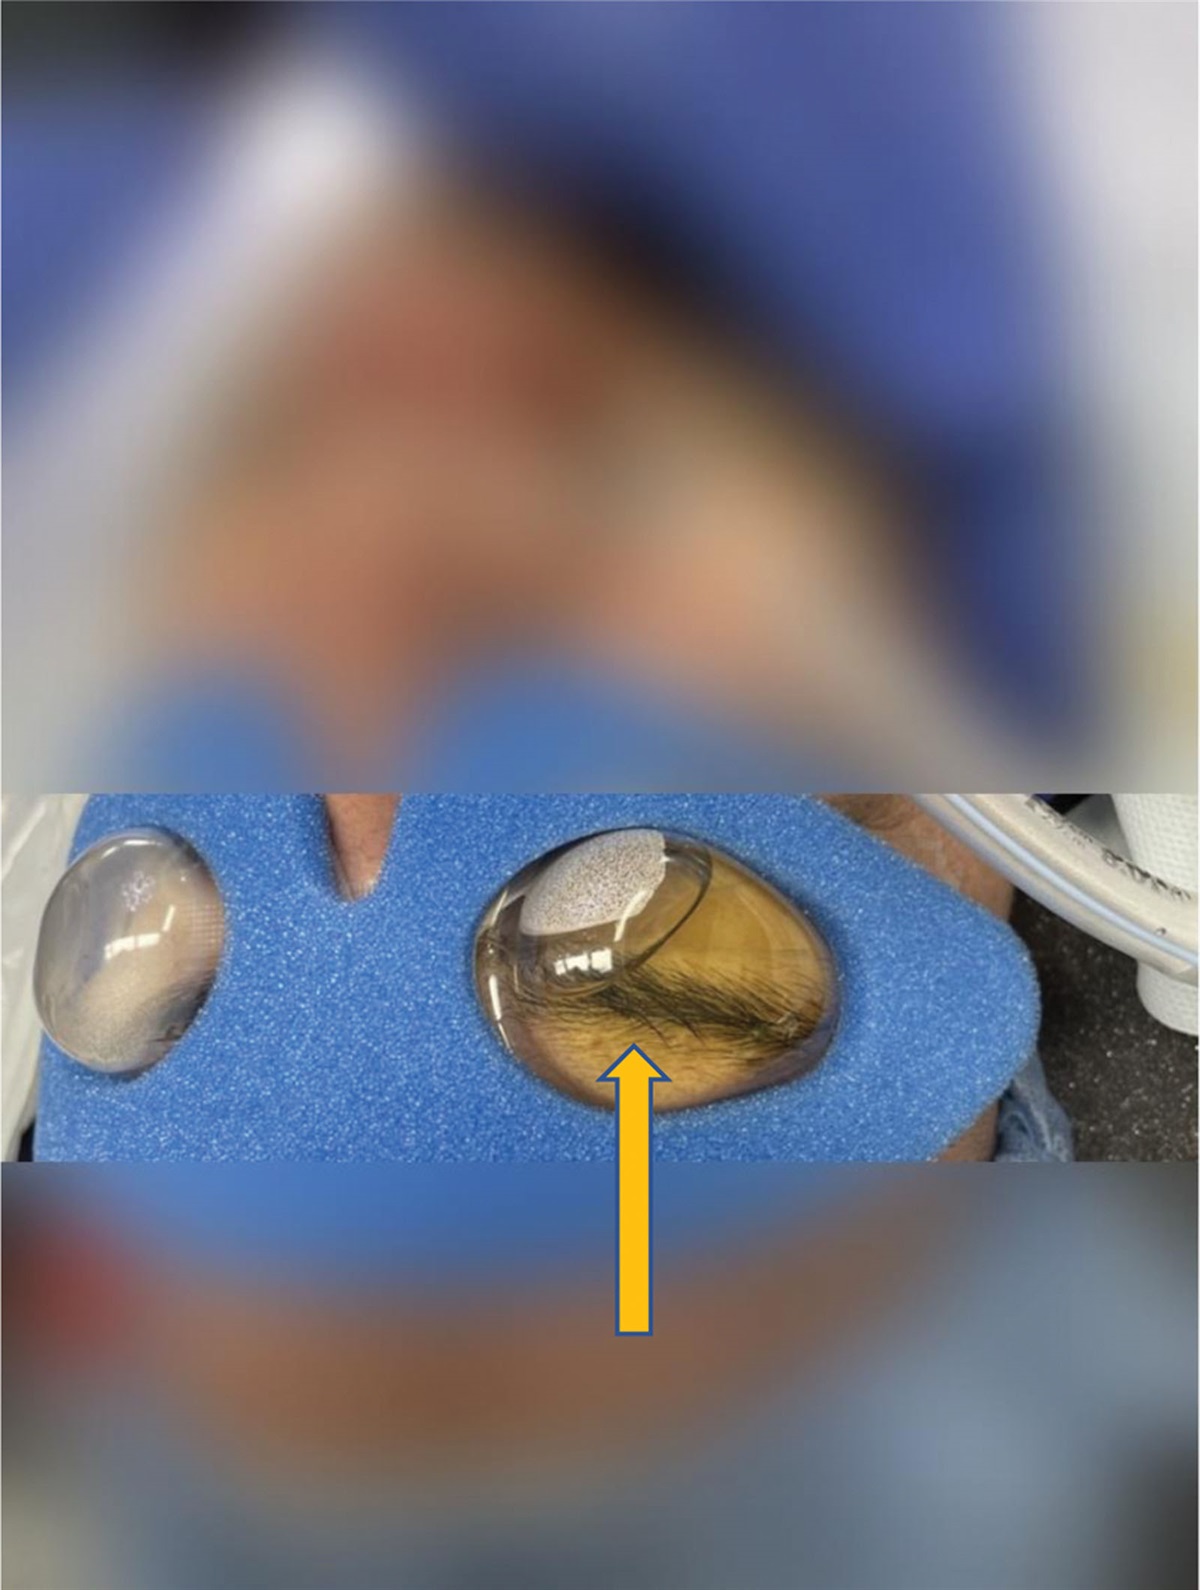 Retrograde Flow of Fluid Through the Nasolacrimal Duct System Under General Anesthesia: A Case Report